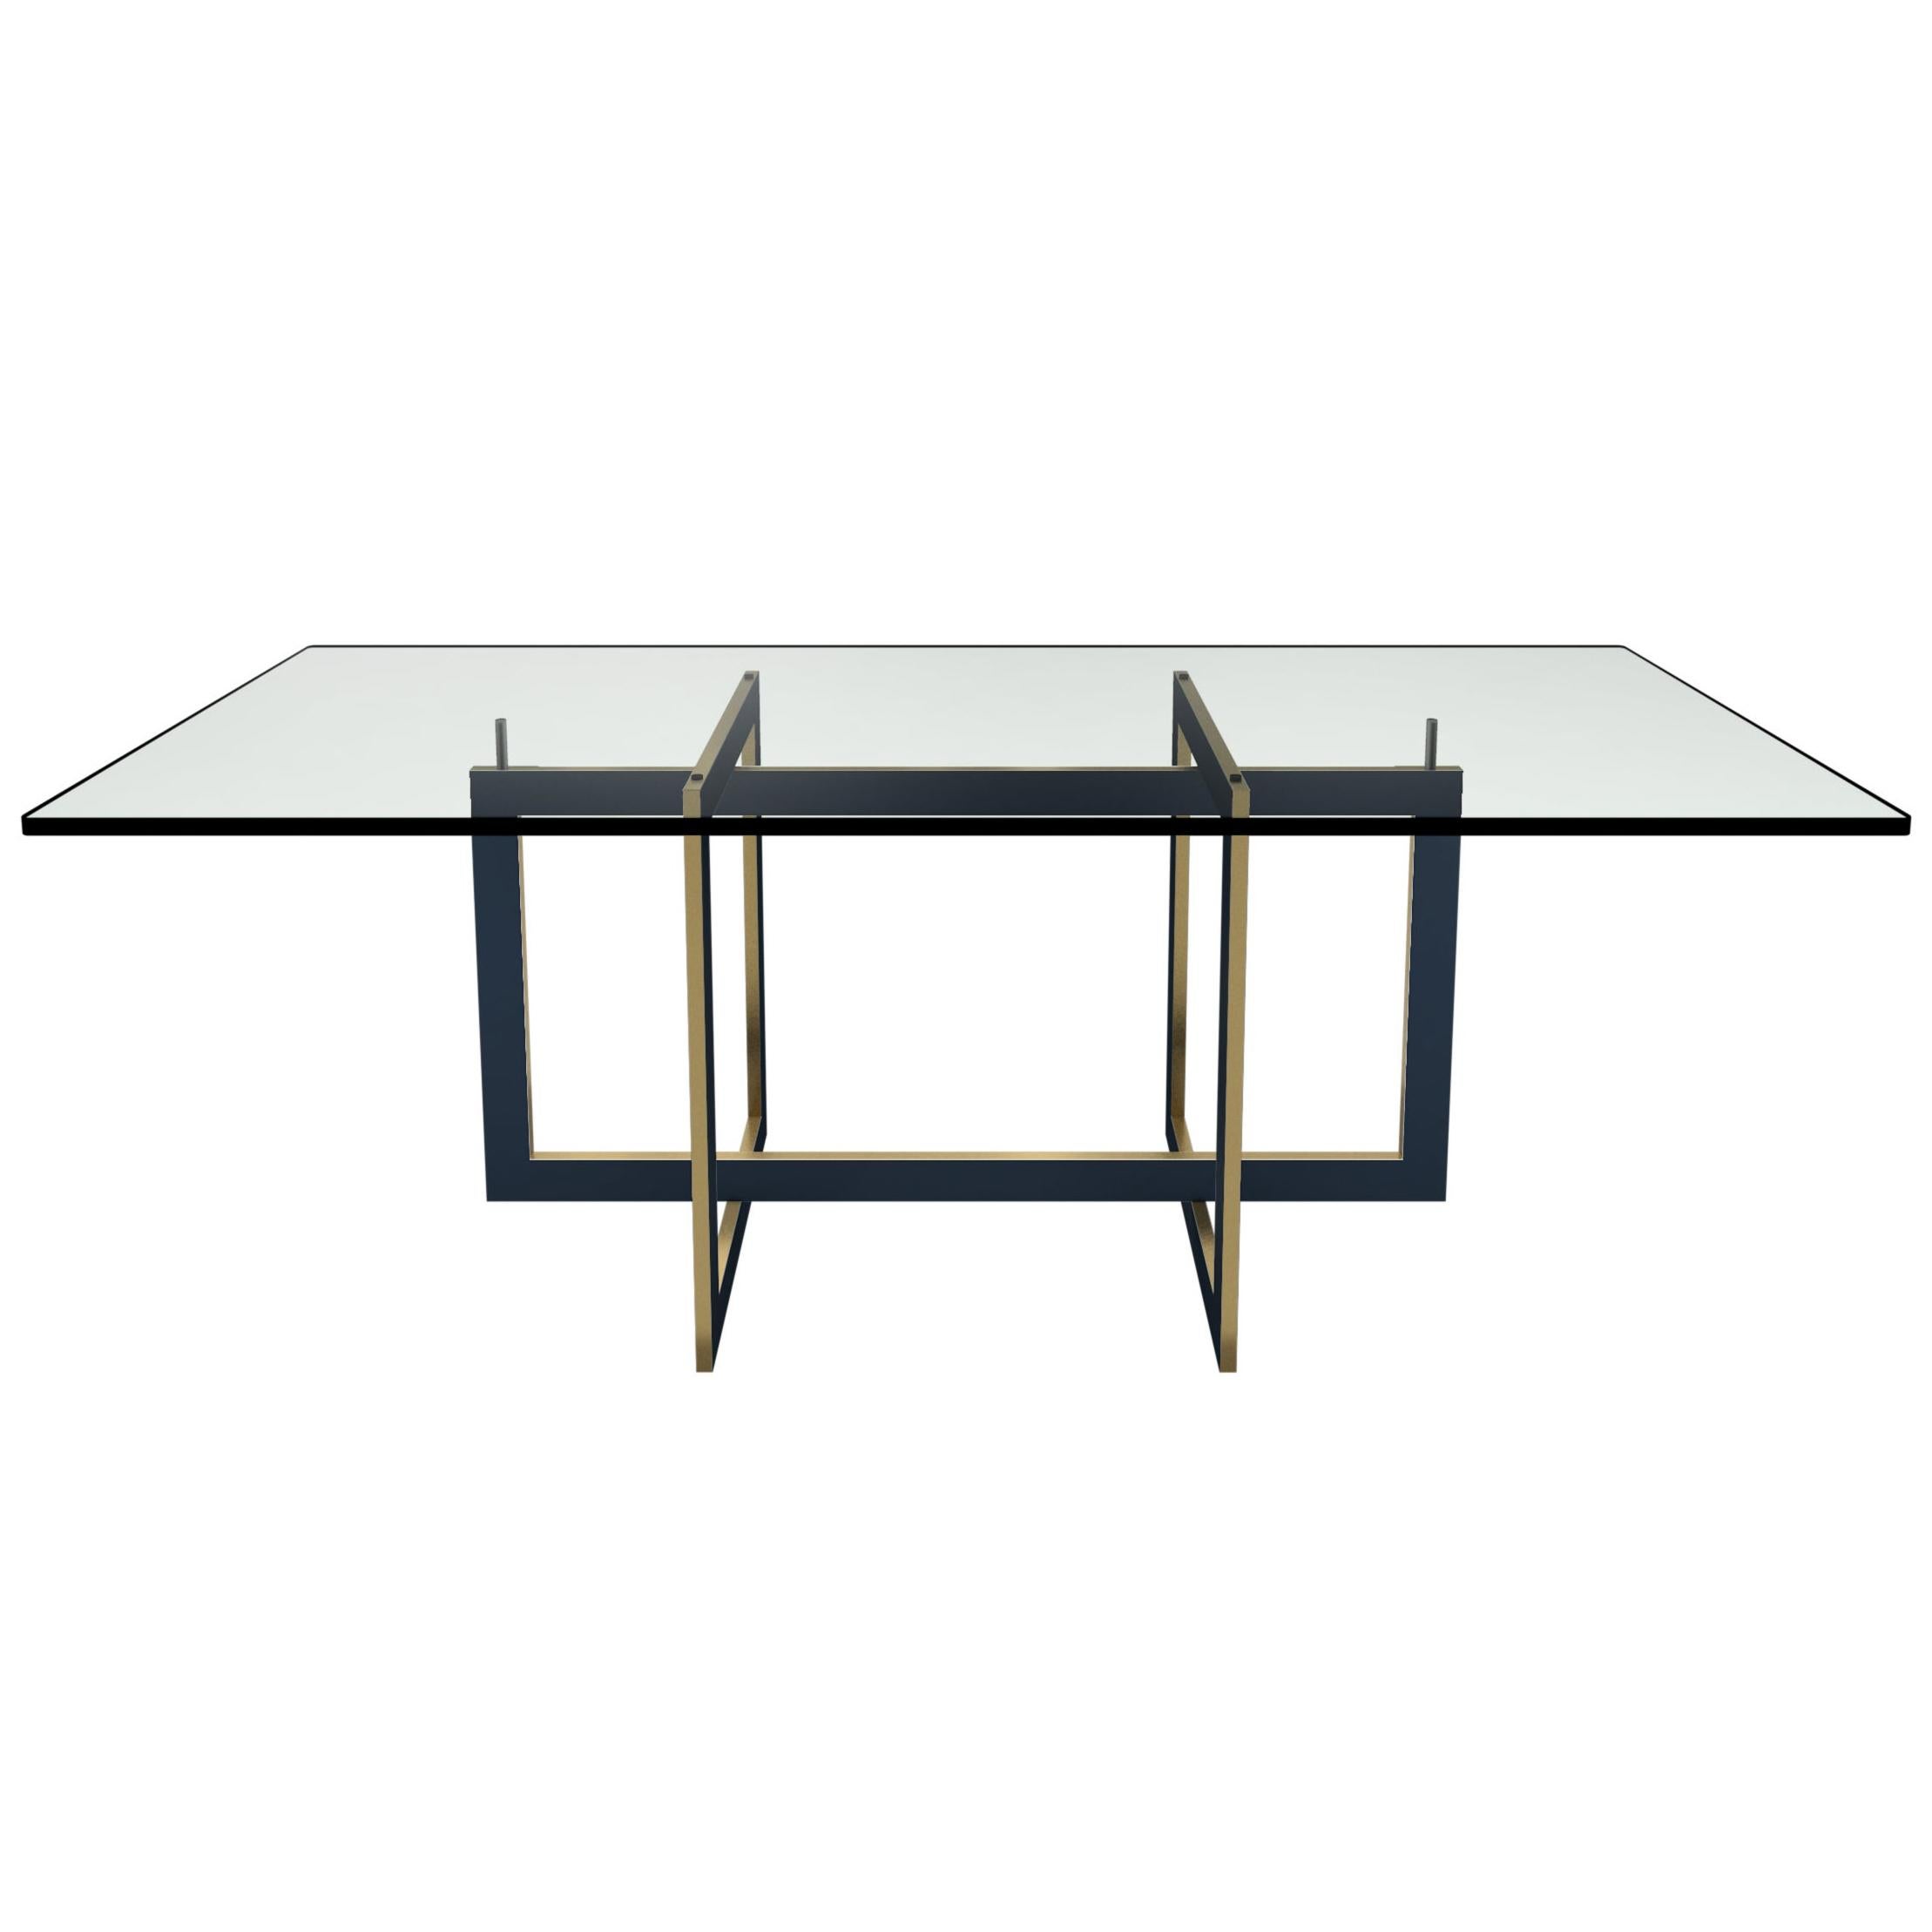 Contemporary Jonathan High Table with Tempered Crystal Top, Black&Brass Version